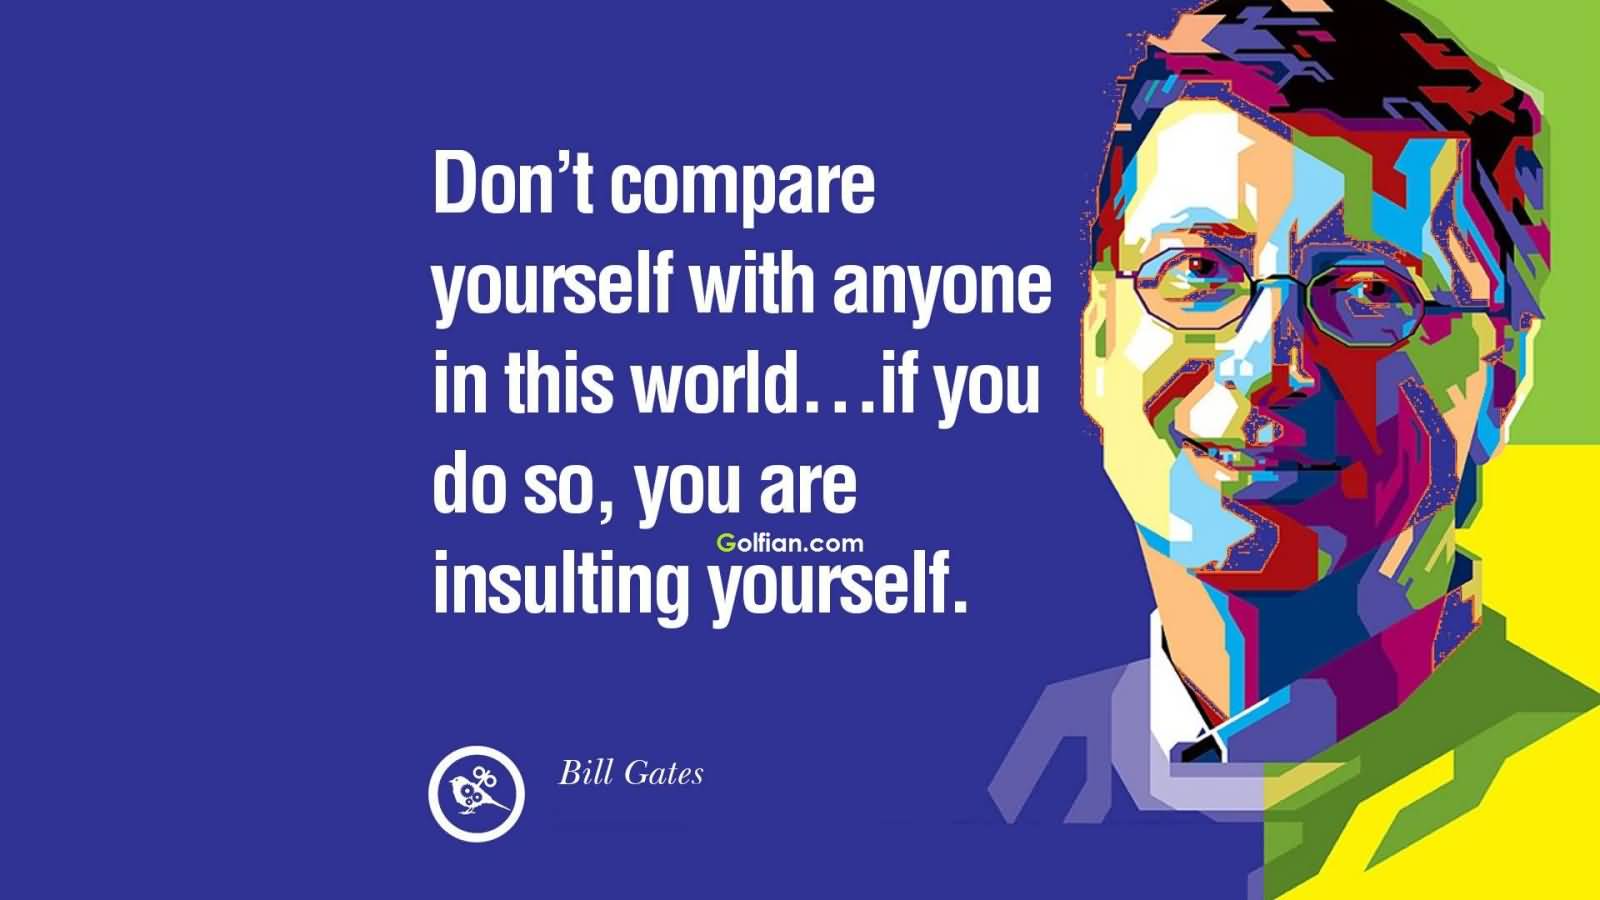 Don't compare yourself with anyone in this world...if you do so, you are insulting yourself. Bill Gates